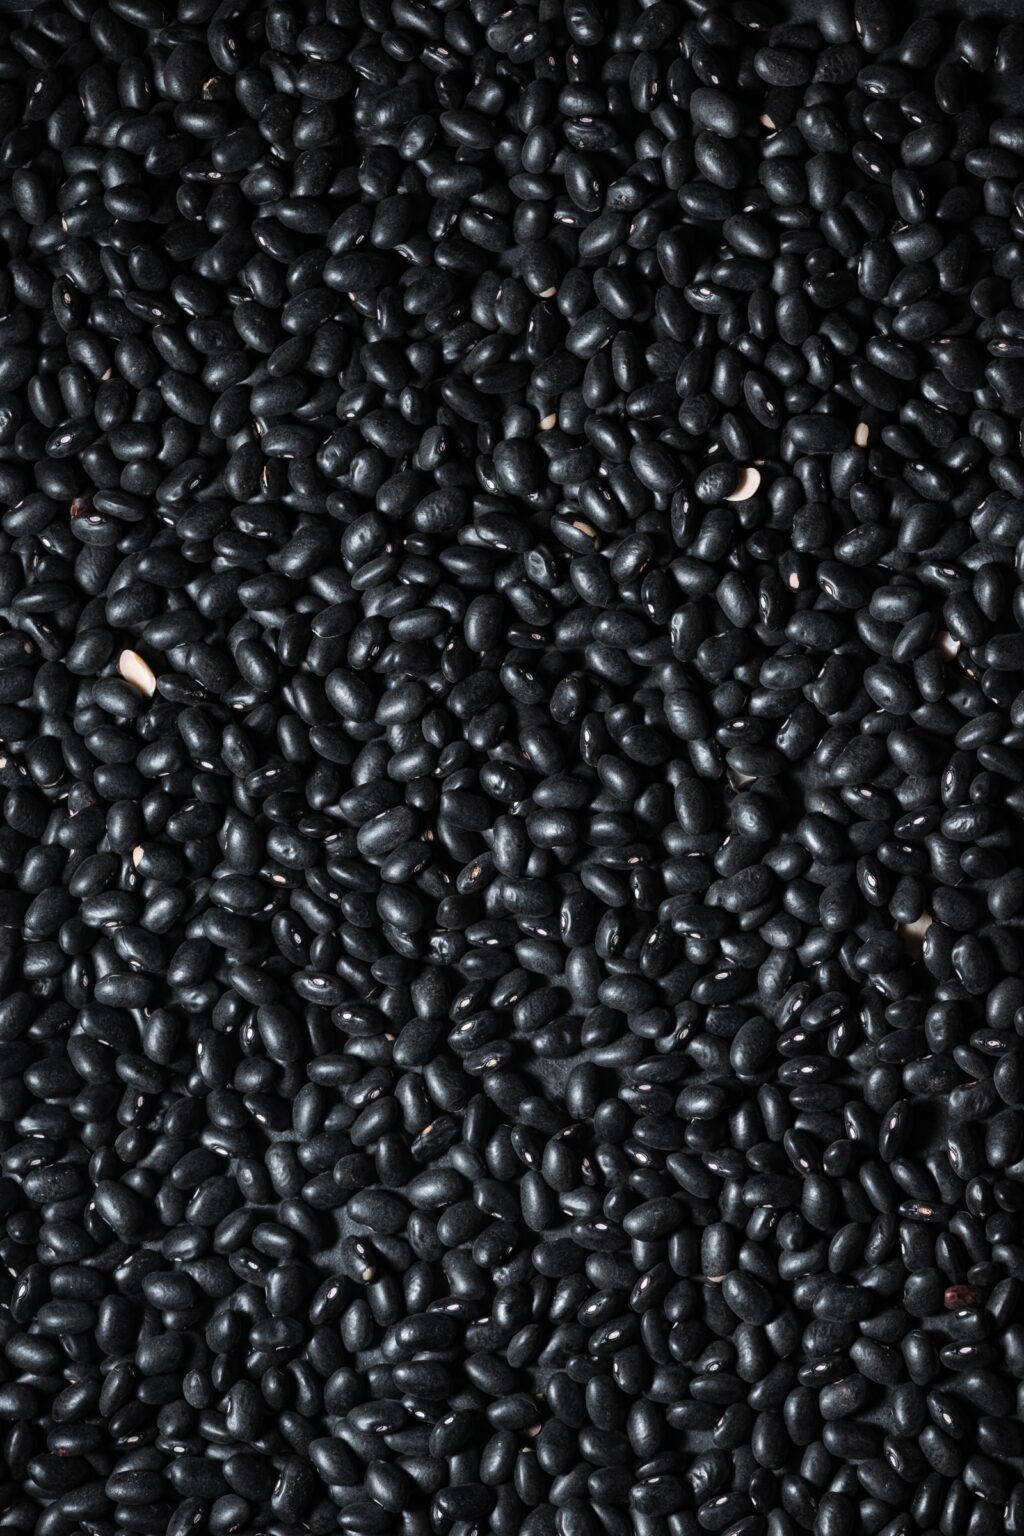 Close up shot of dried black beans.